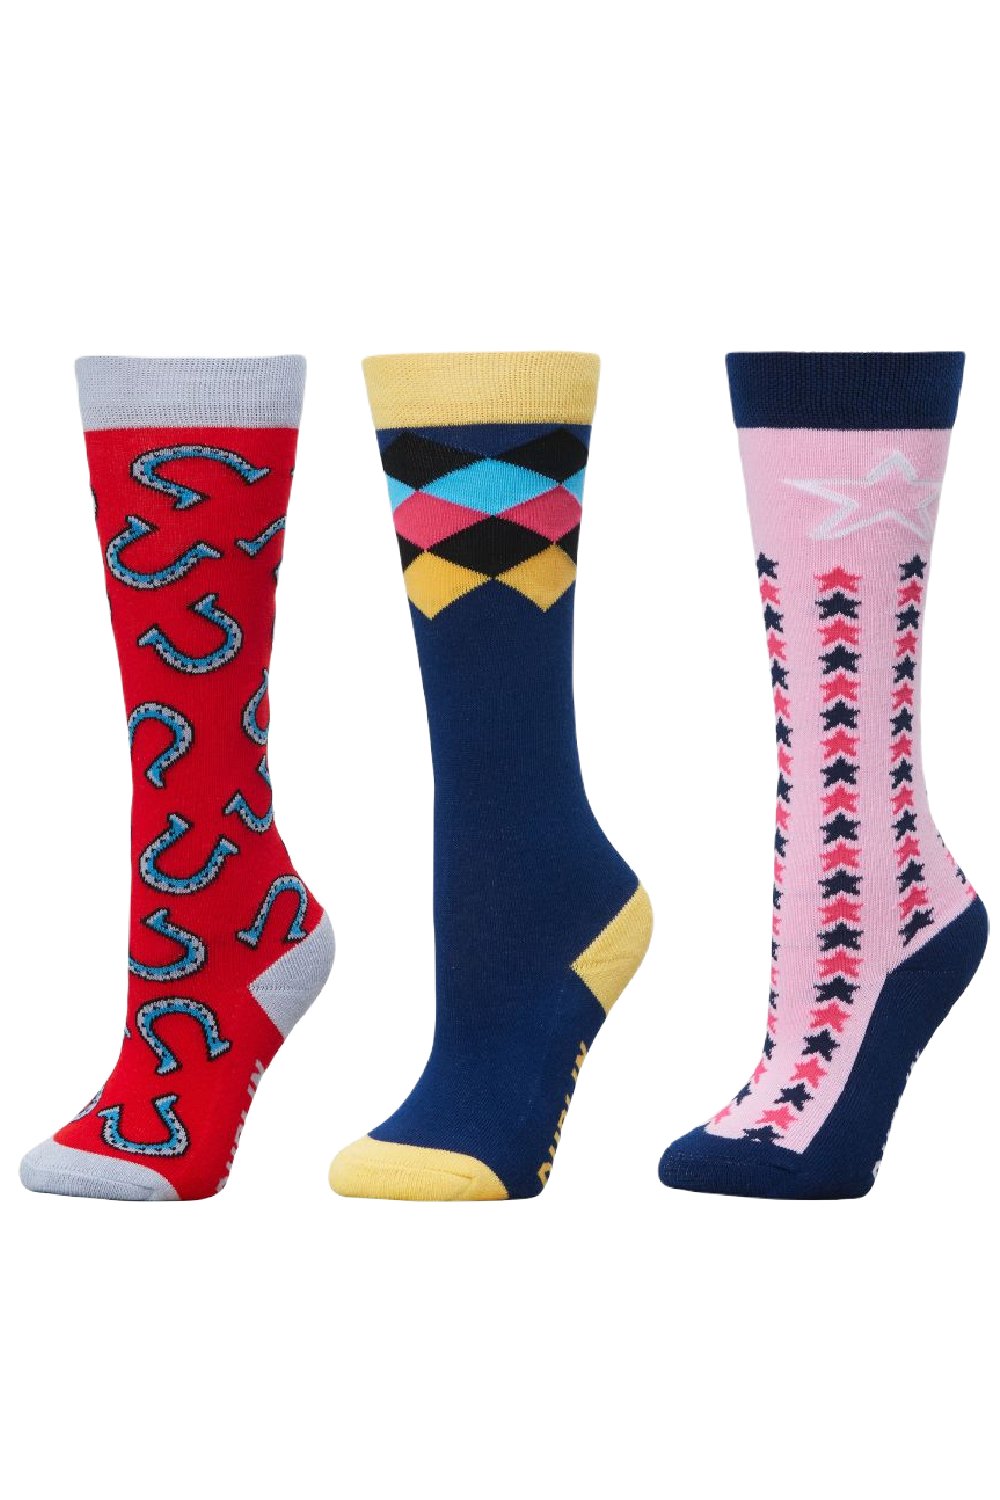 Dublin Childrens Three Pack Socks in Coral Horseshoes 